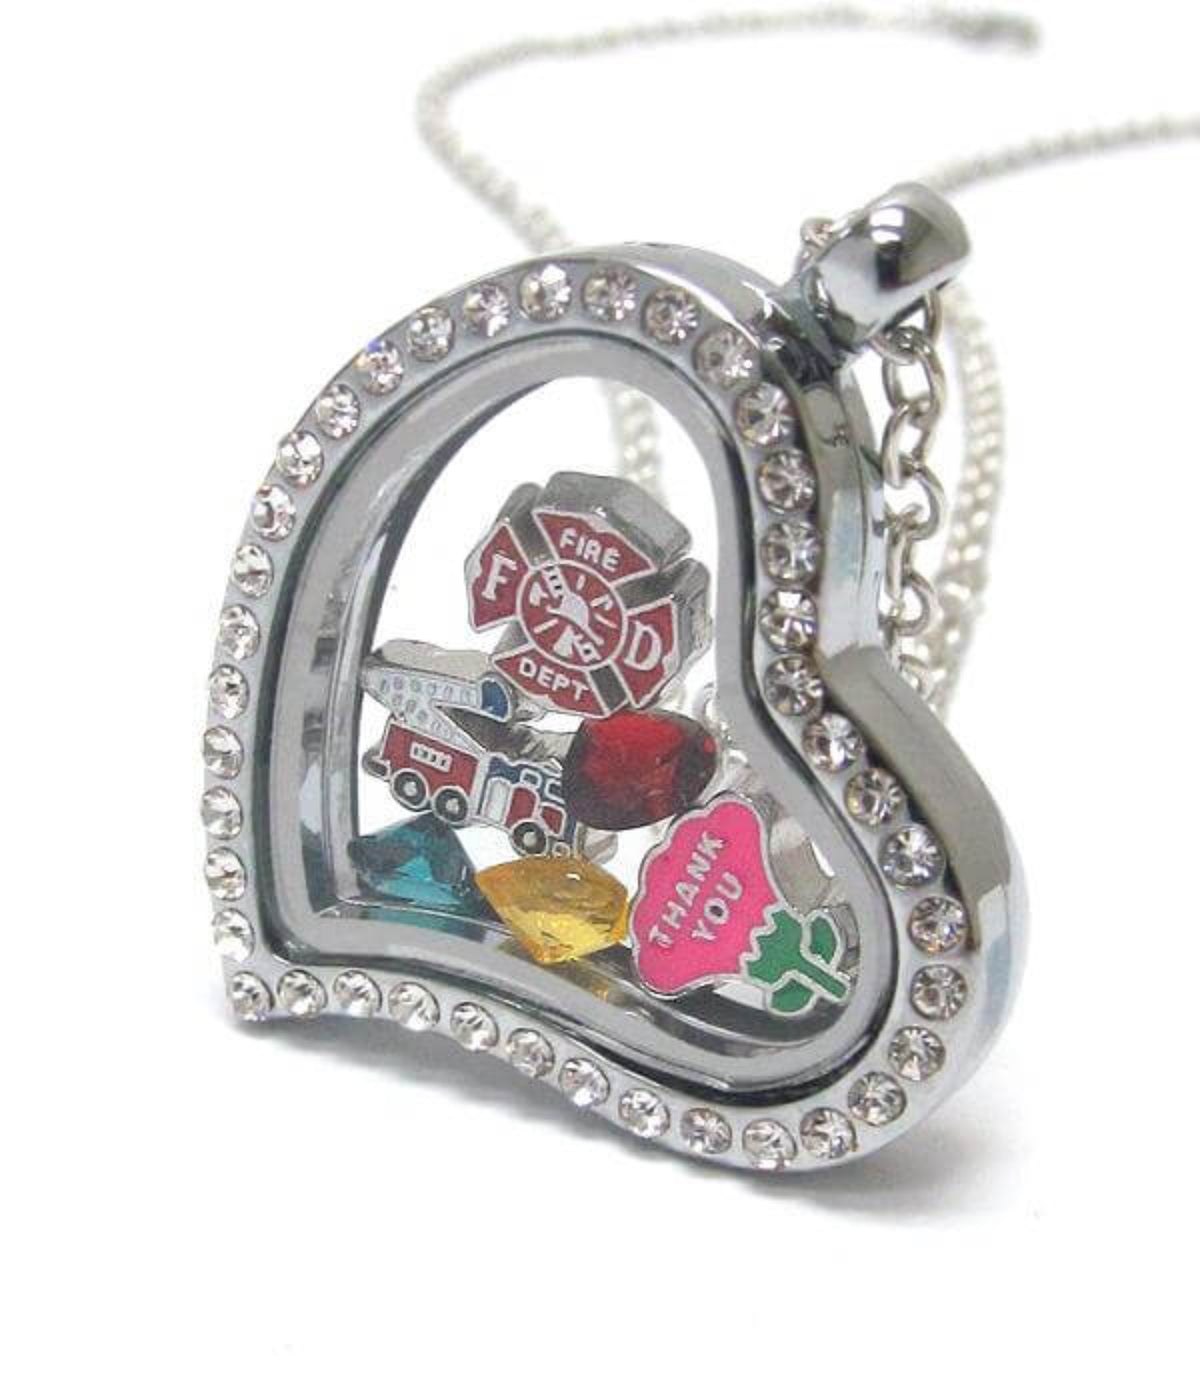 Heart Charm Locket Necklace for Firefighters - The House of Awareness